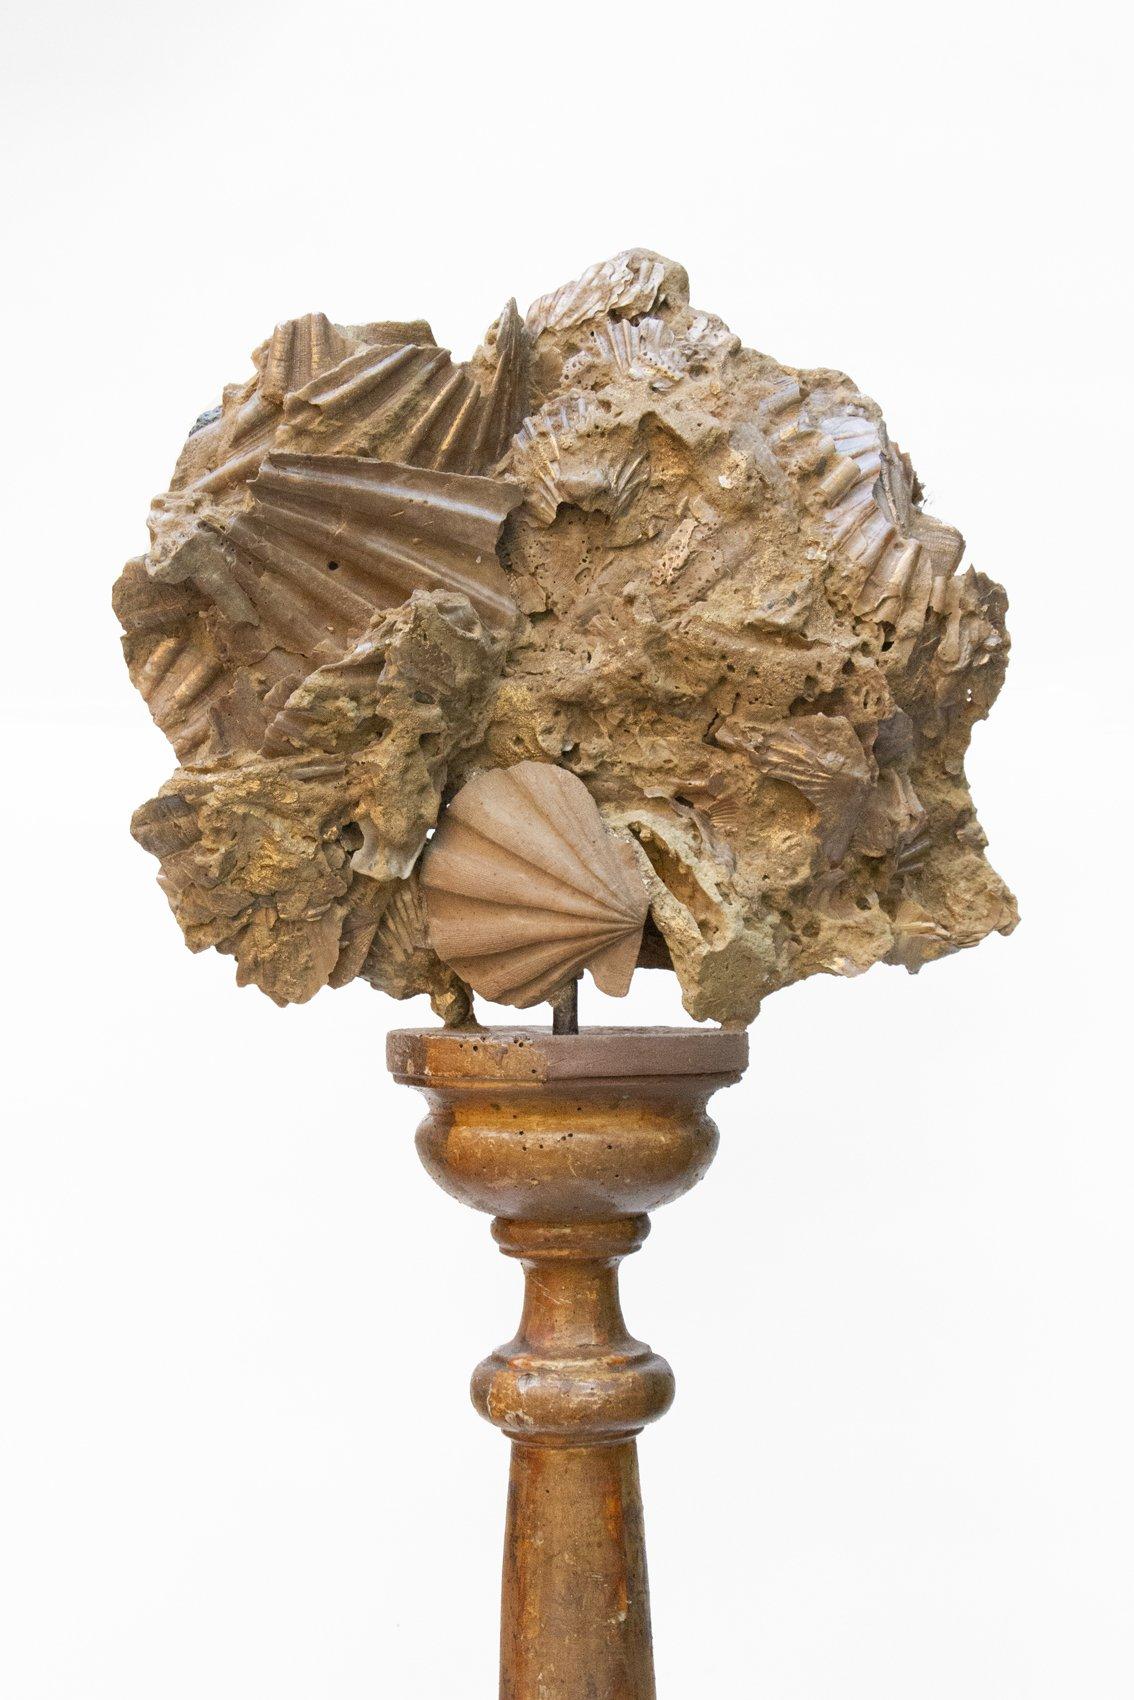 18th Century Italian Altar Stick with a Chesapecten Fossil Shell and Pearls  In Fair Condition For Sale In Dublin, Dalkey